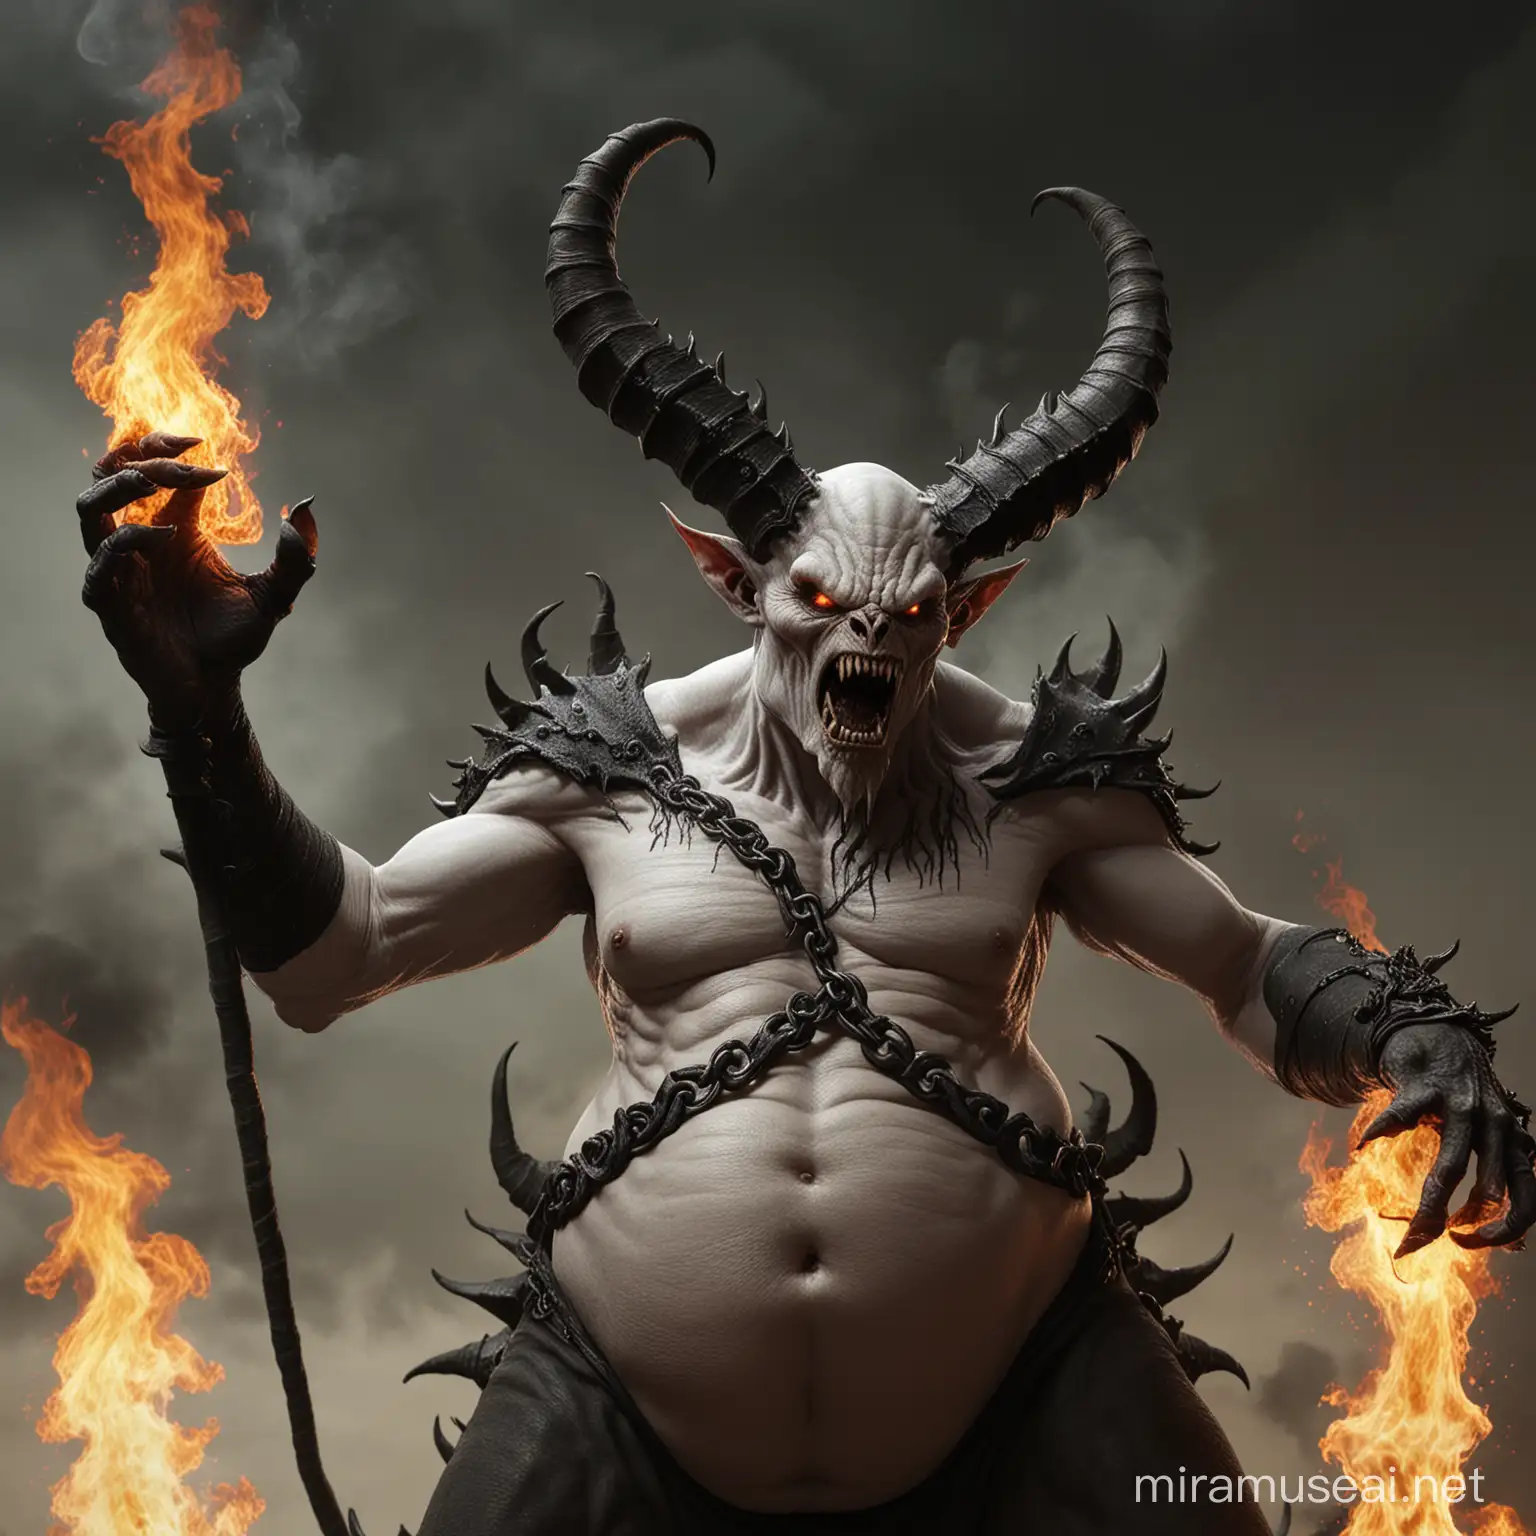 Overweight Demon with Curved Horn and Flaming Hands in a Realistic CGI Style